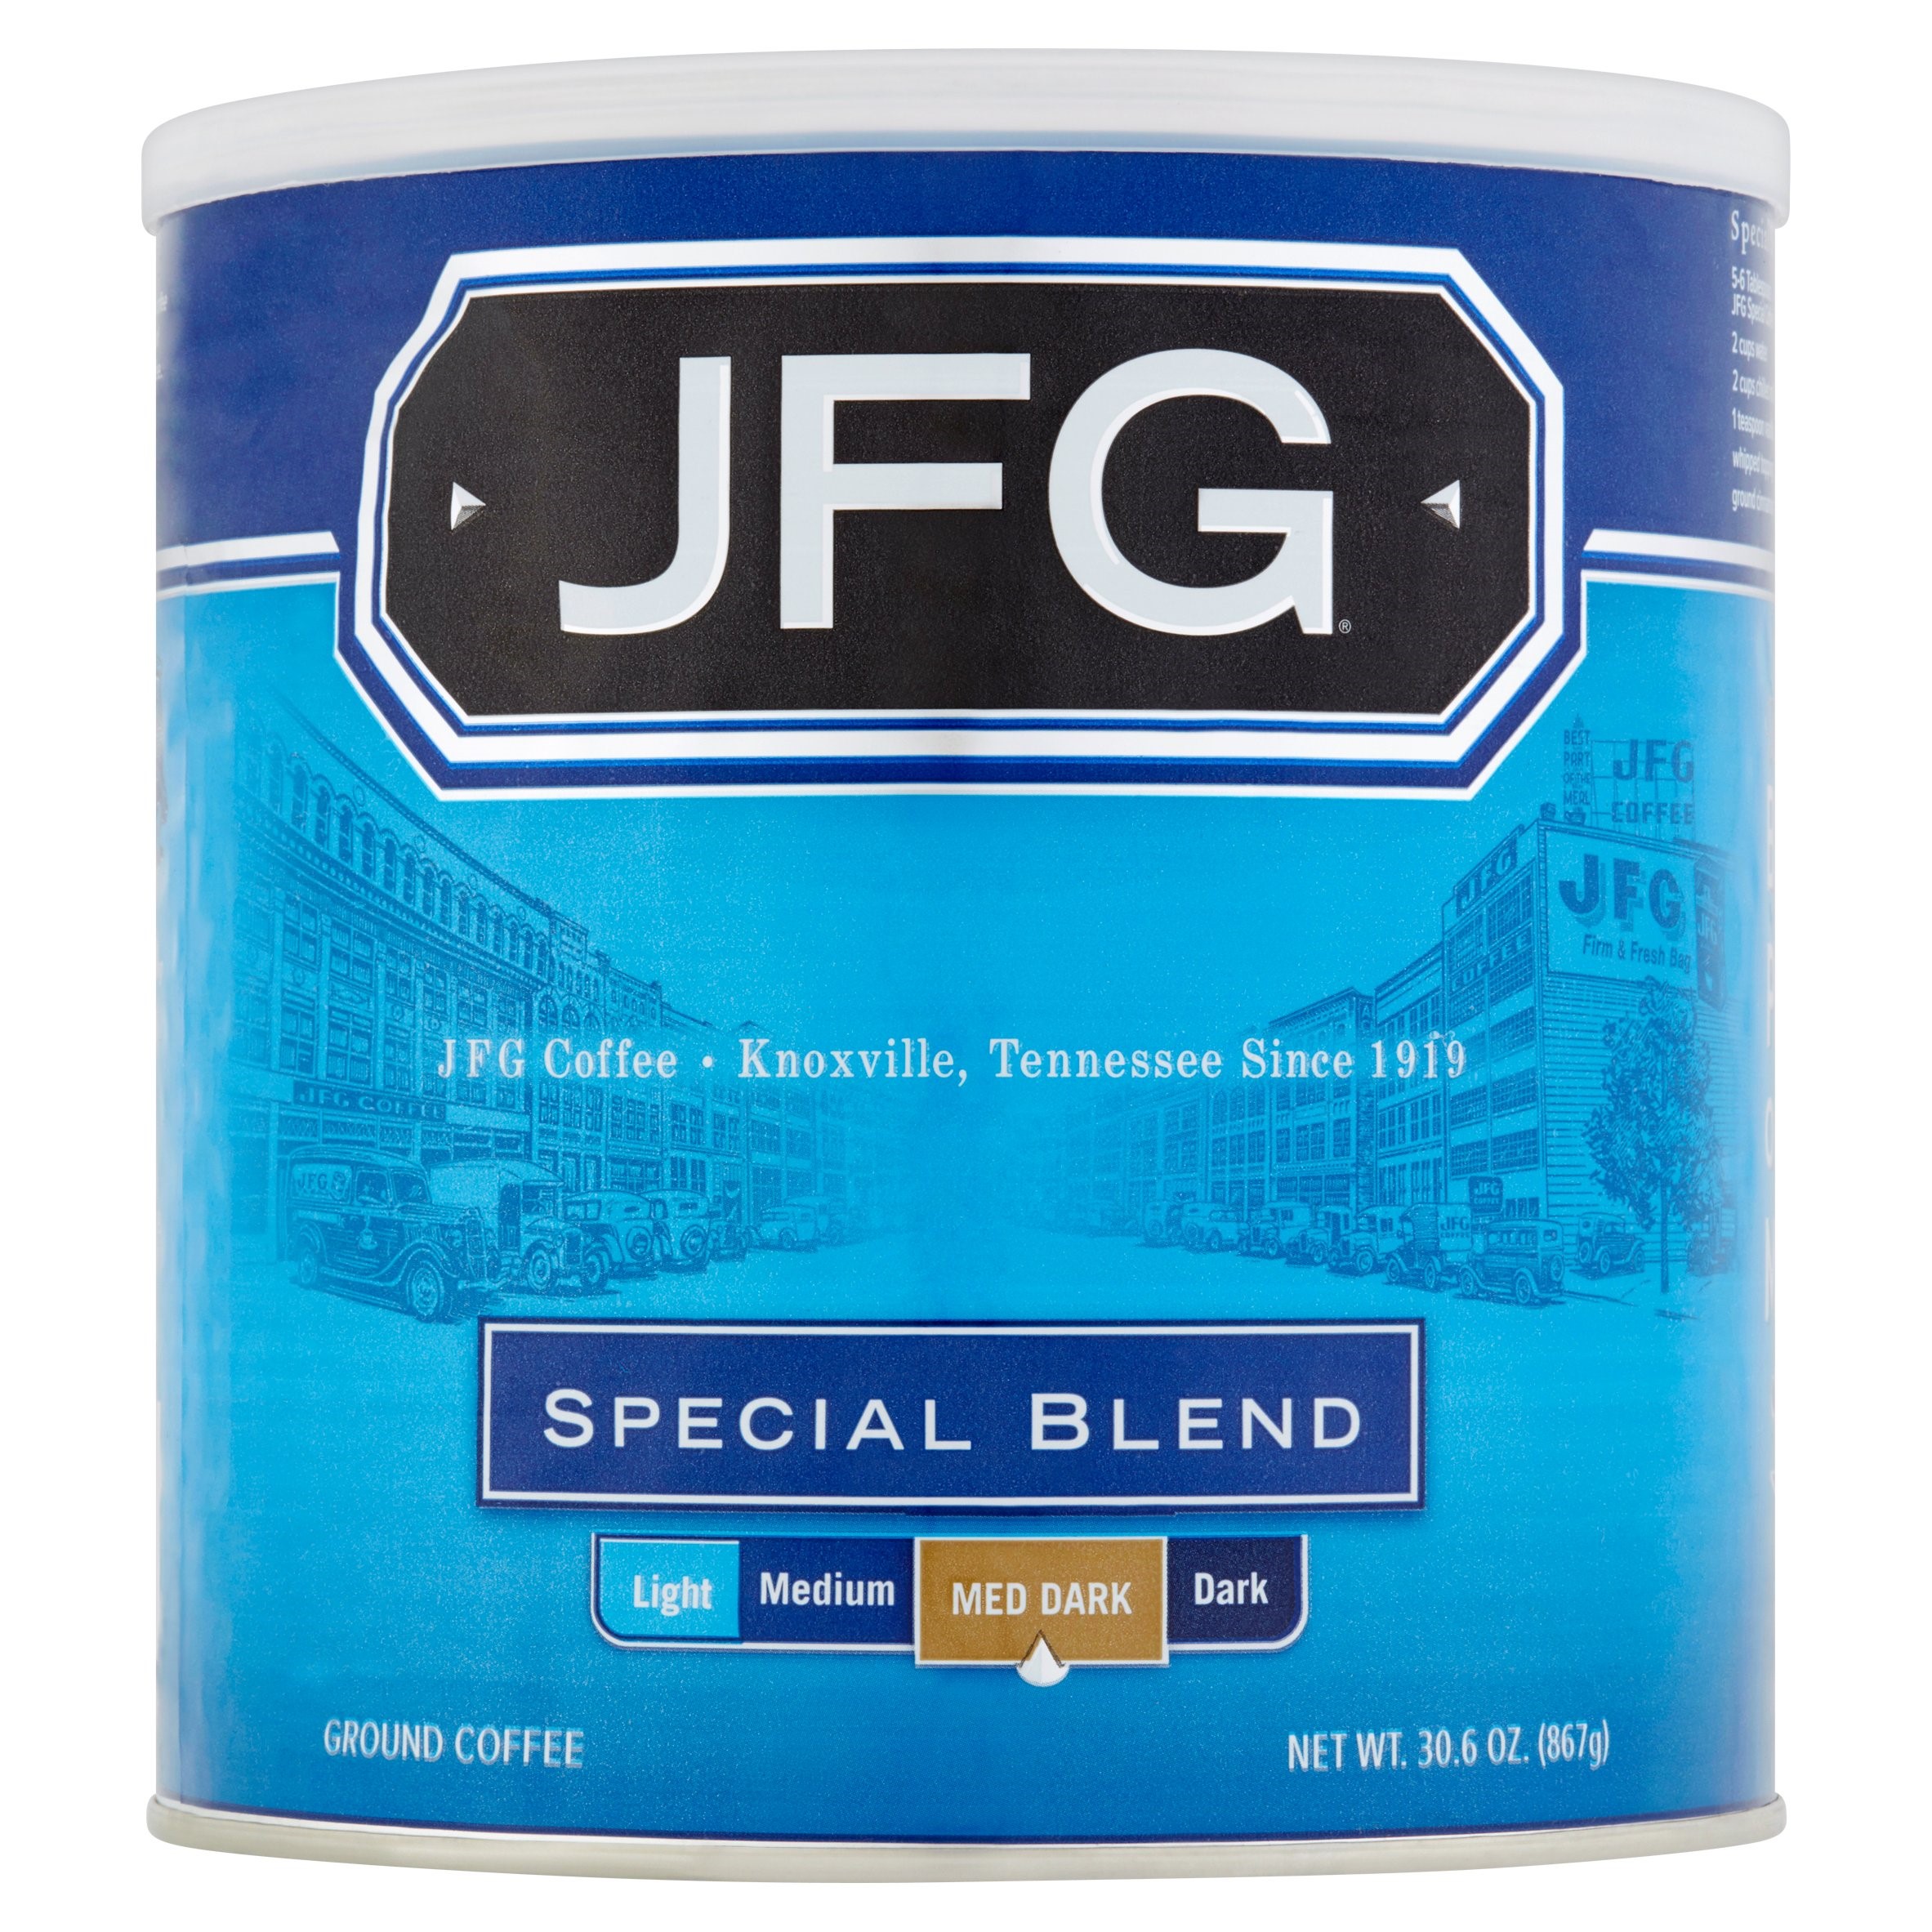 JFG Special Blend Ground Coffee, 30.6 Oz. - image 1 of 14